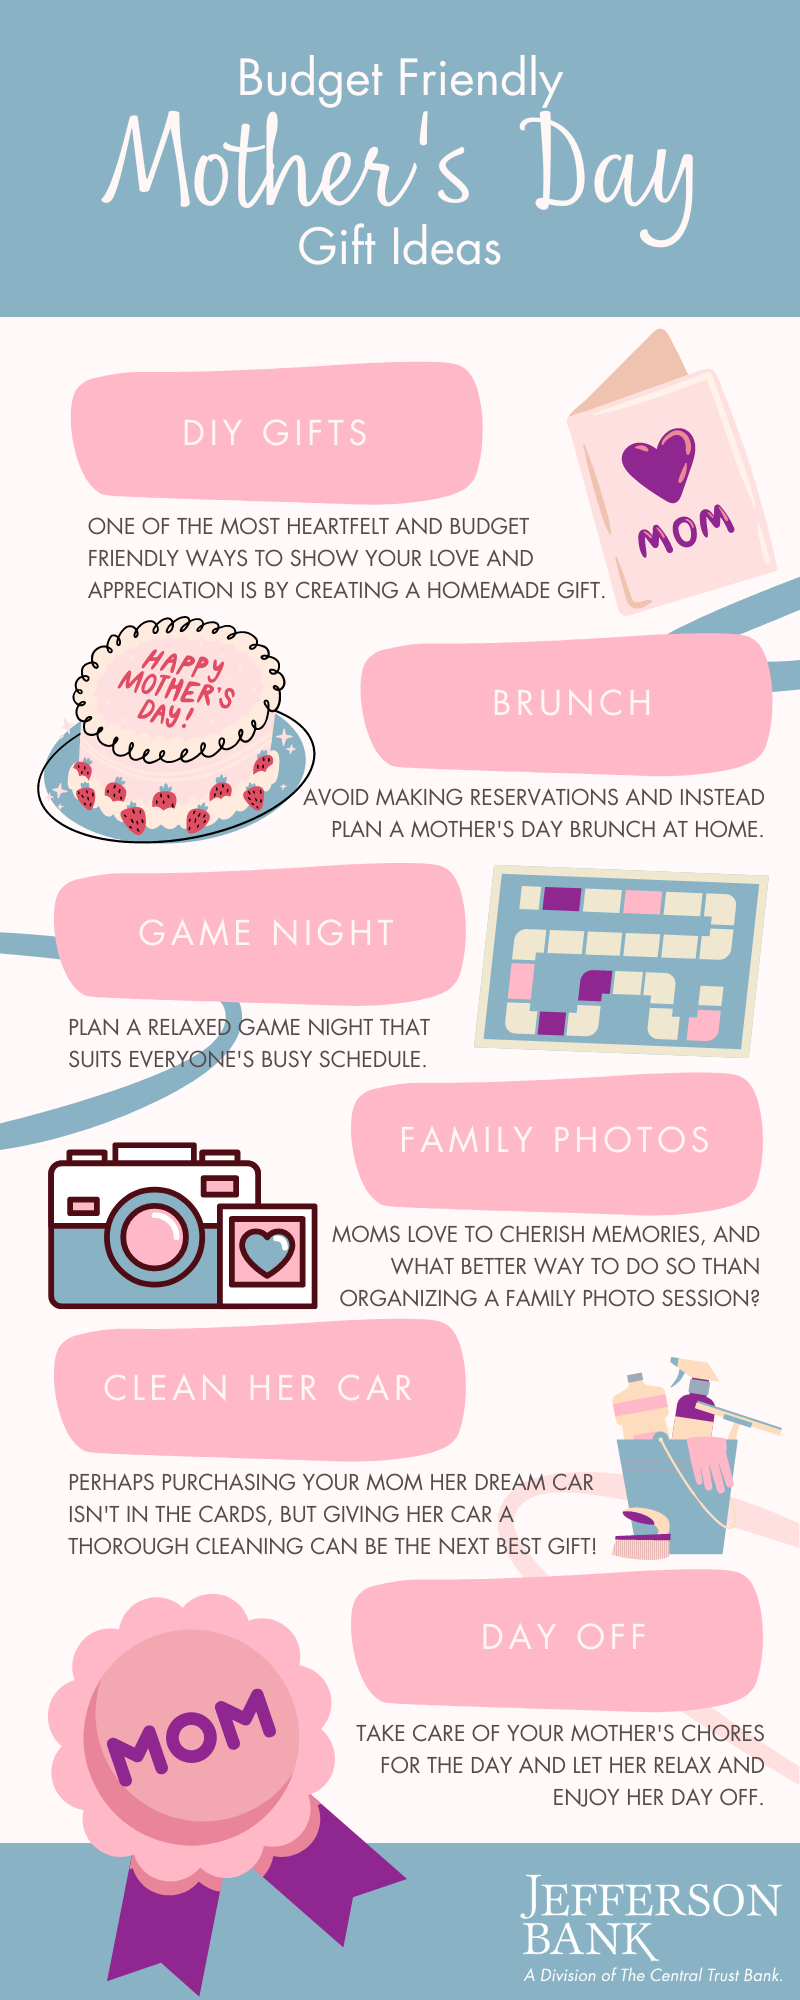 Budget friendly Mother's Day infographic